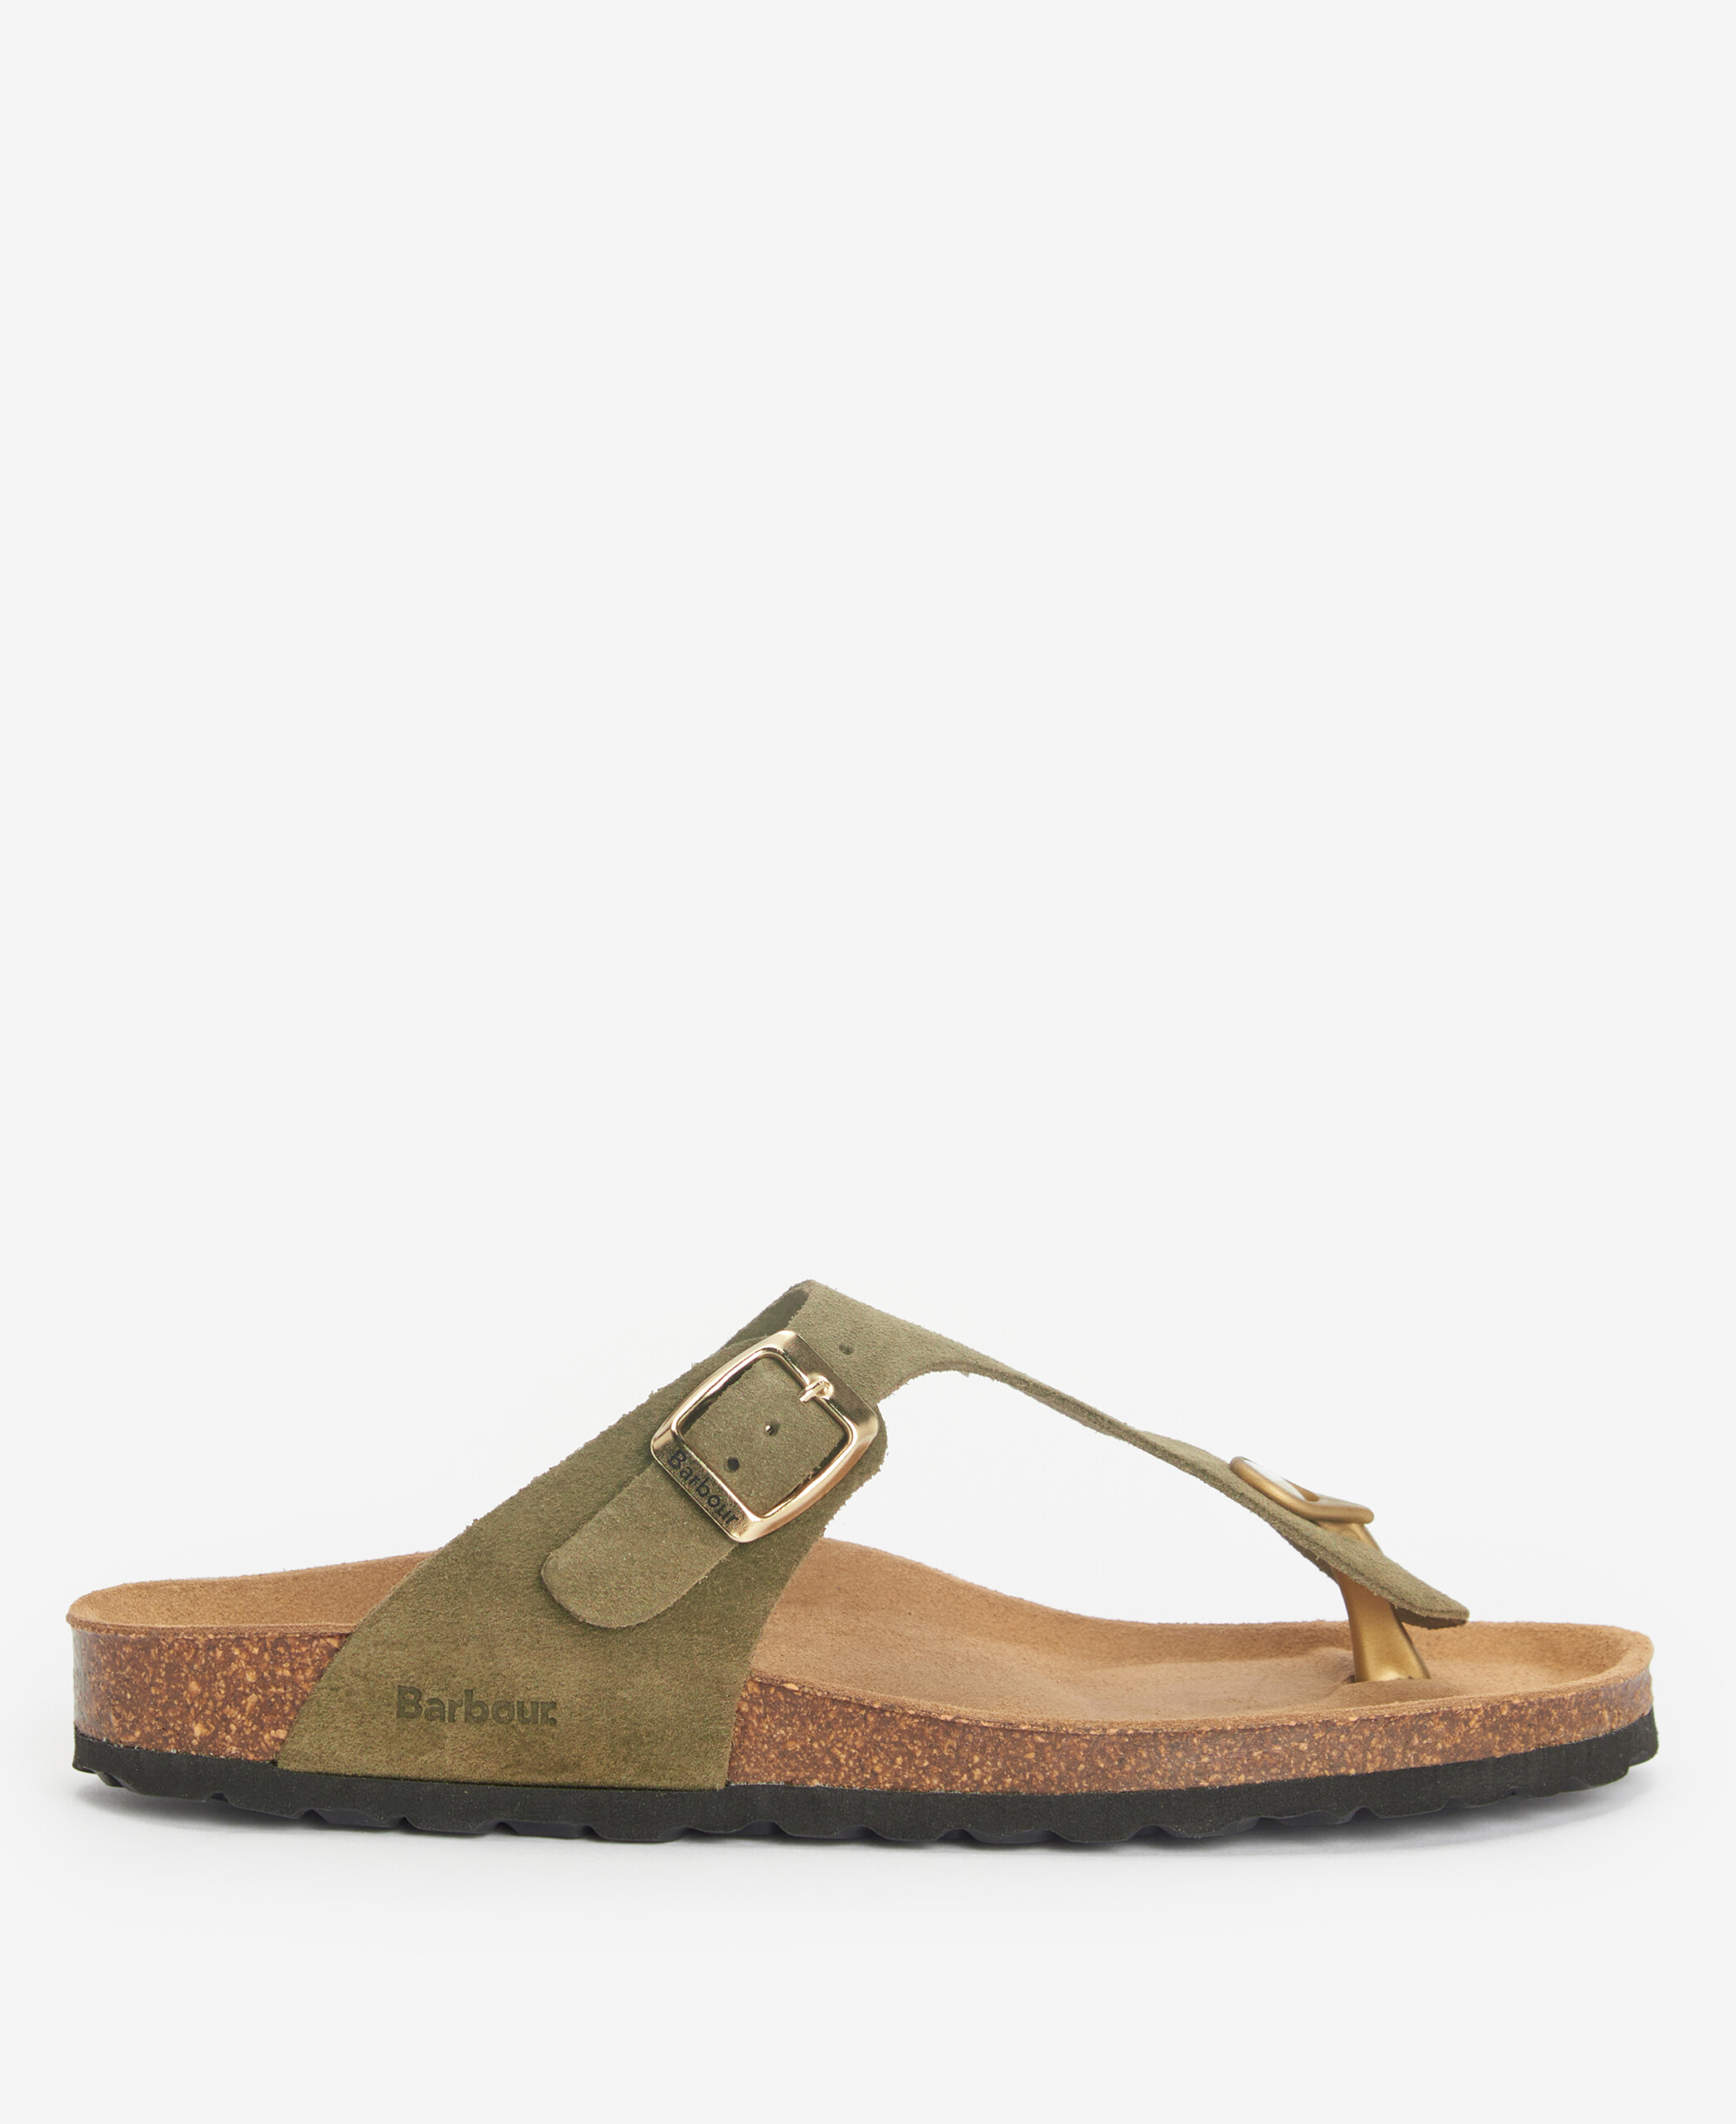 Margate Toepost Sandals – Olive Suede